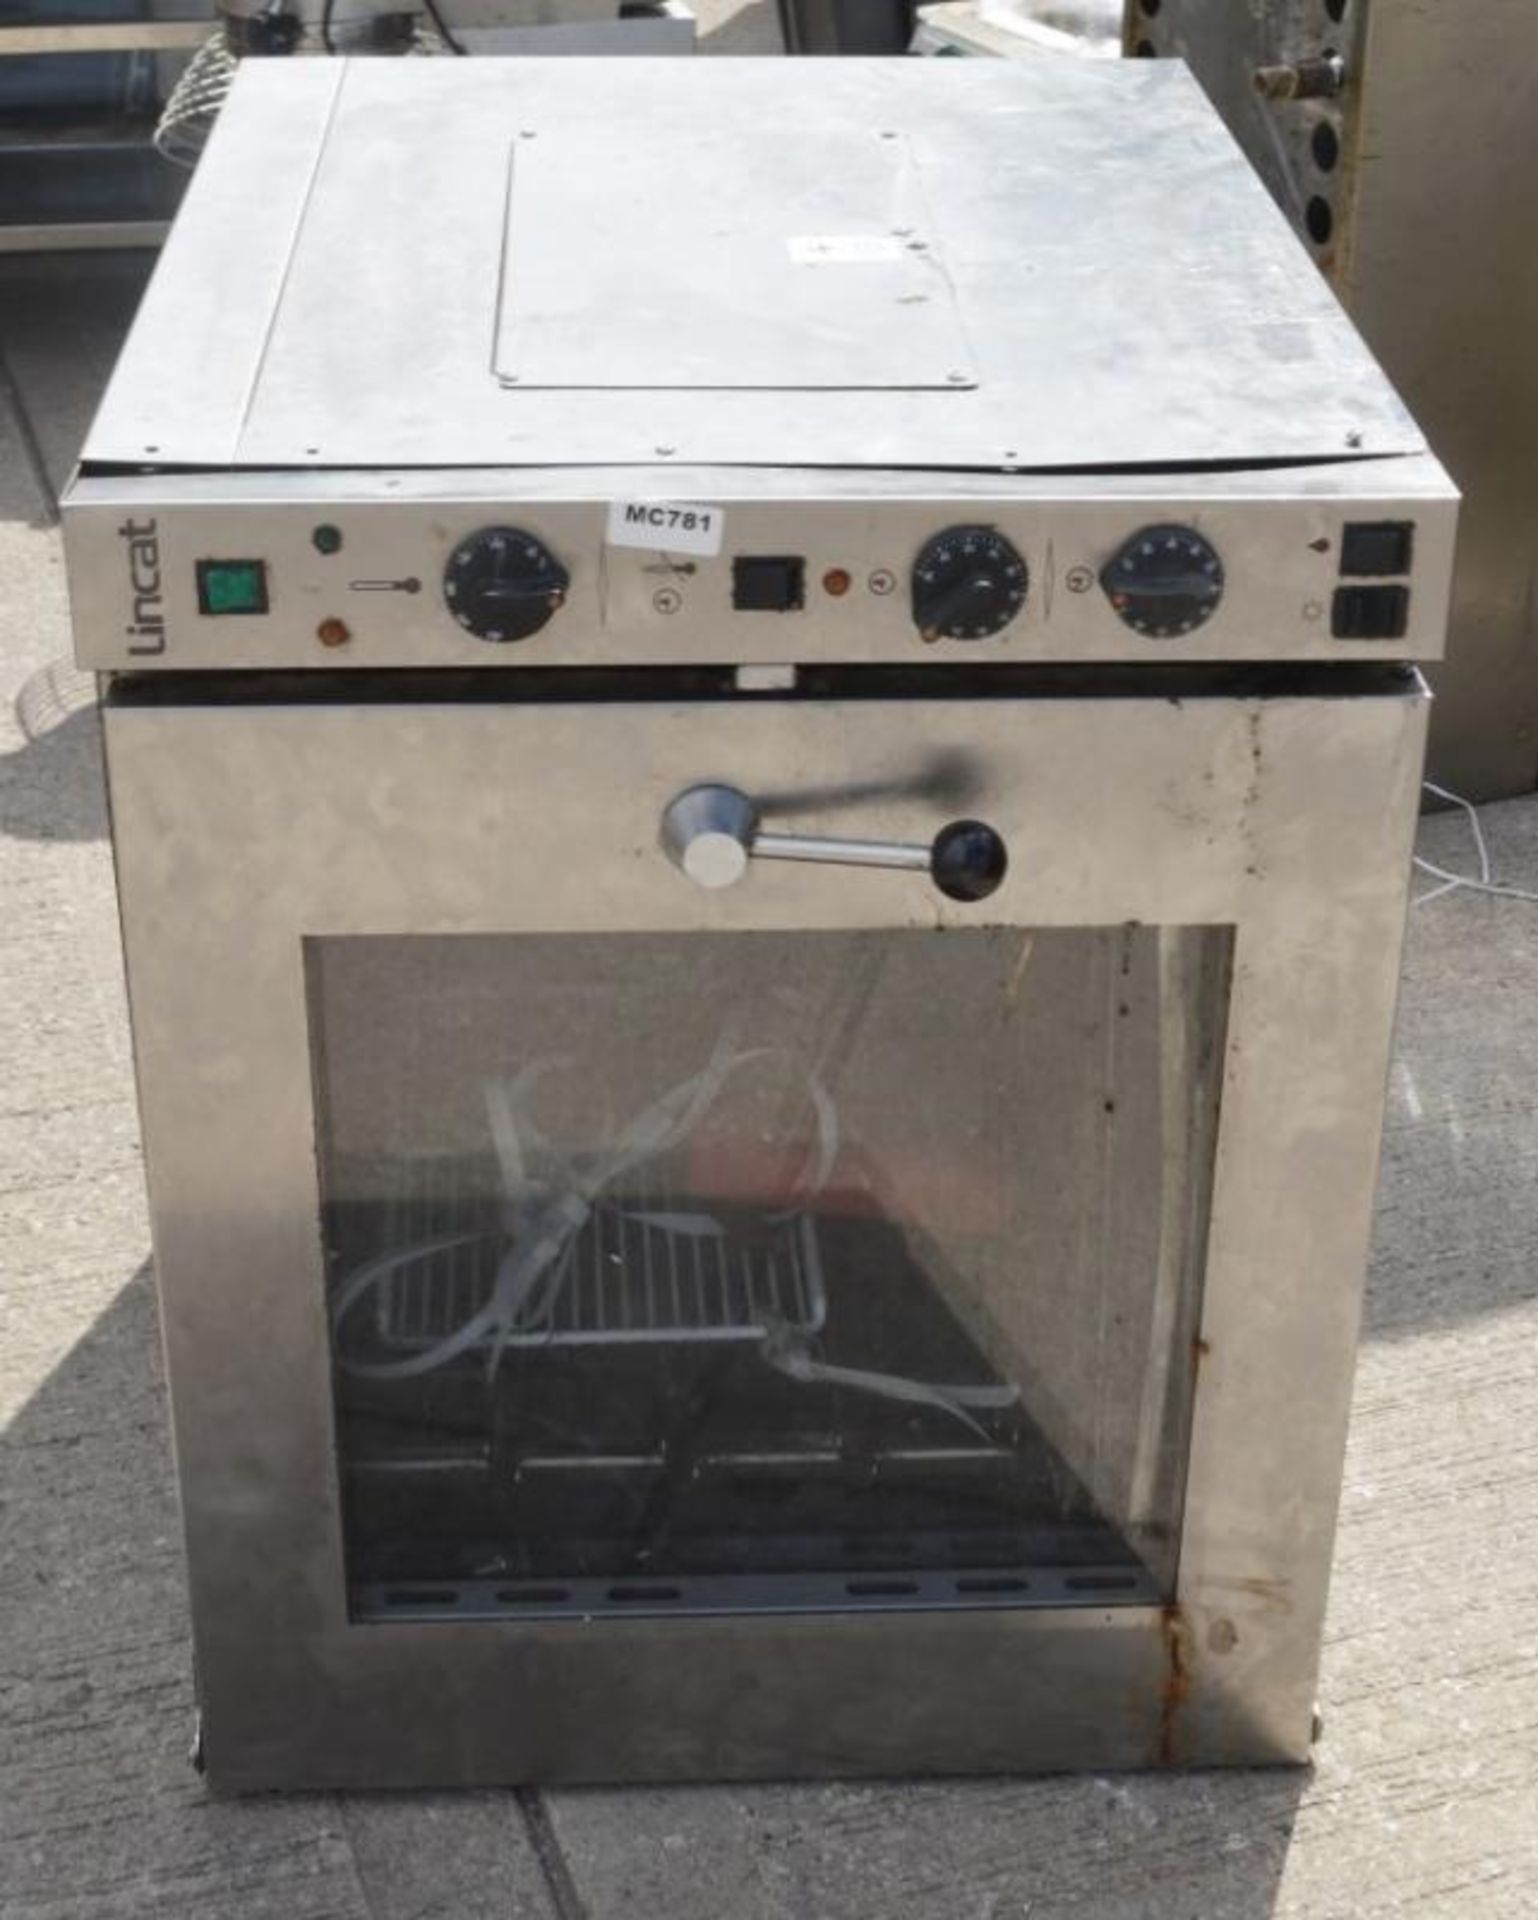 1 x Lincat ECO9 170 Ltr Electric Counter-Top Convection Oven - Pre-owned, Taken From An Asian Fusion